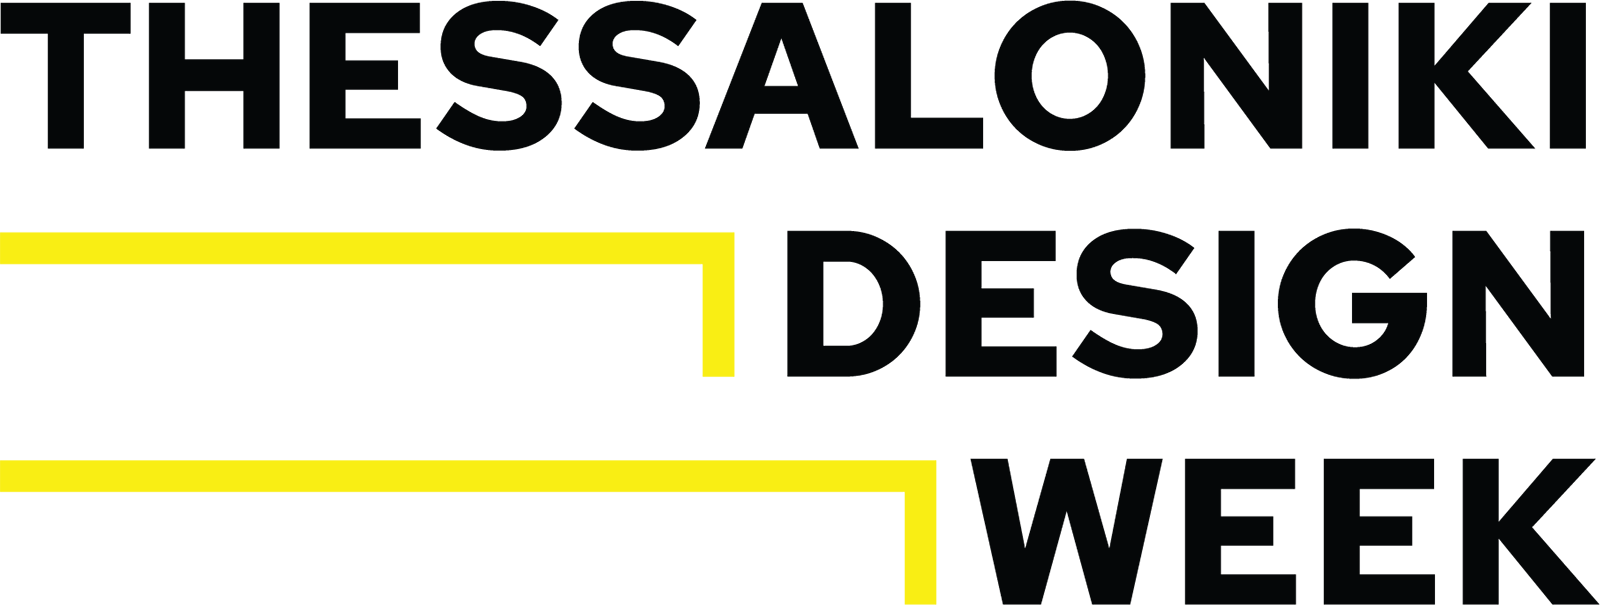 Archisearch INNOVATION IN DESIGN | 2nd Thessaloniki Design Week: a platform for networking, extroversion and promotion of innovative ideas and projects through events, exhibitions and competitions